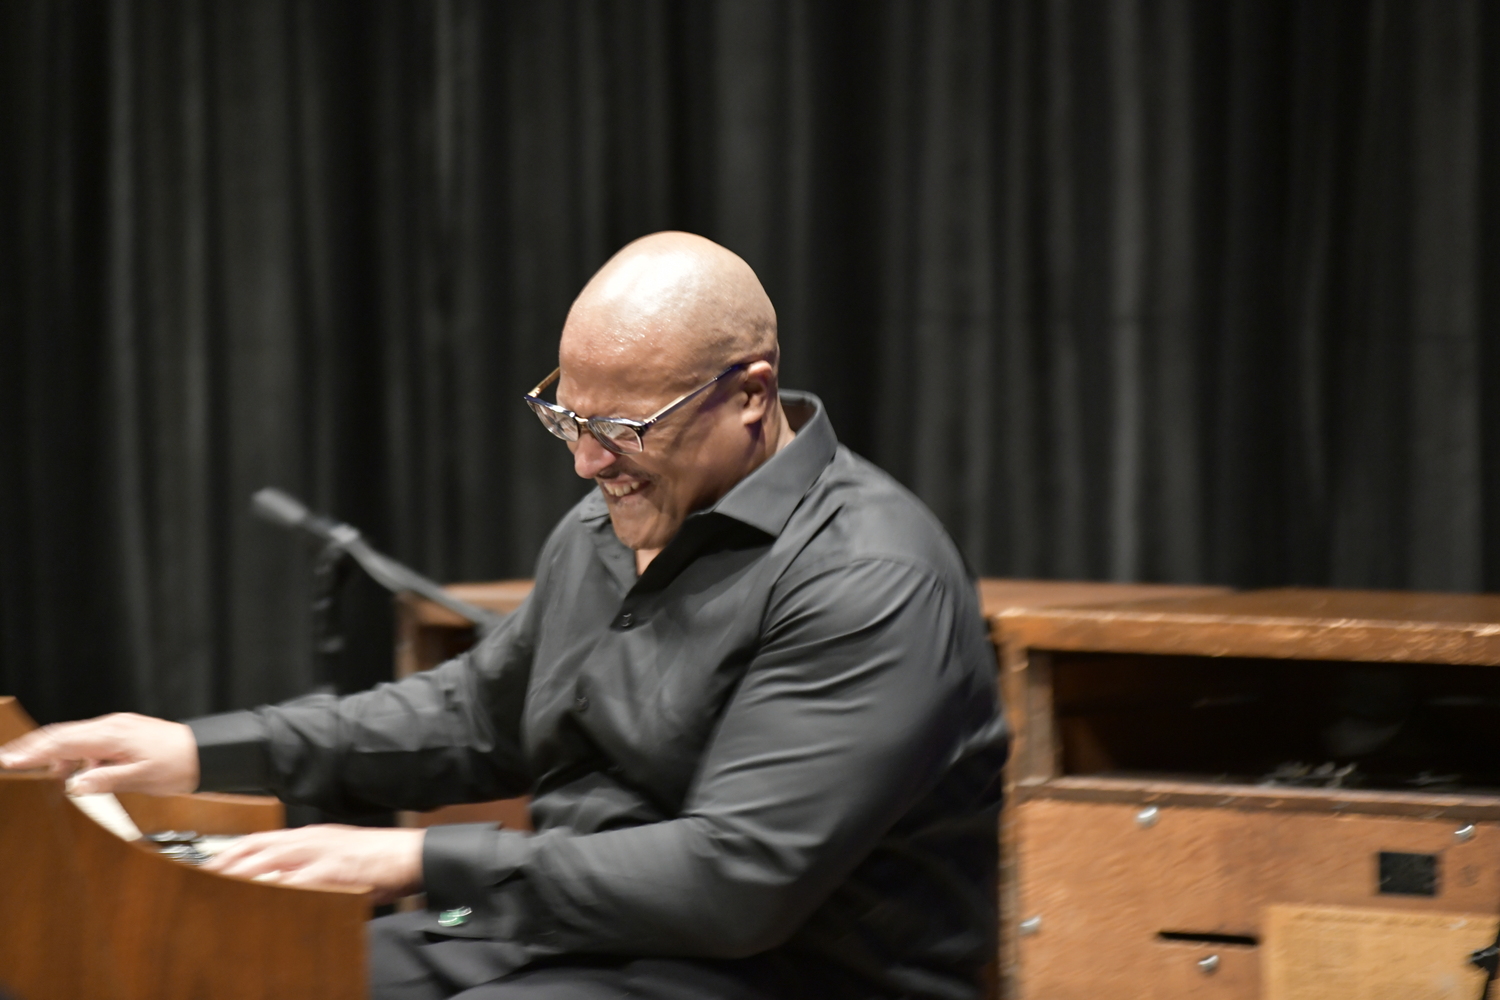 Organist, pianist and composer Gregory Lewis perform 